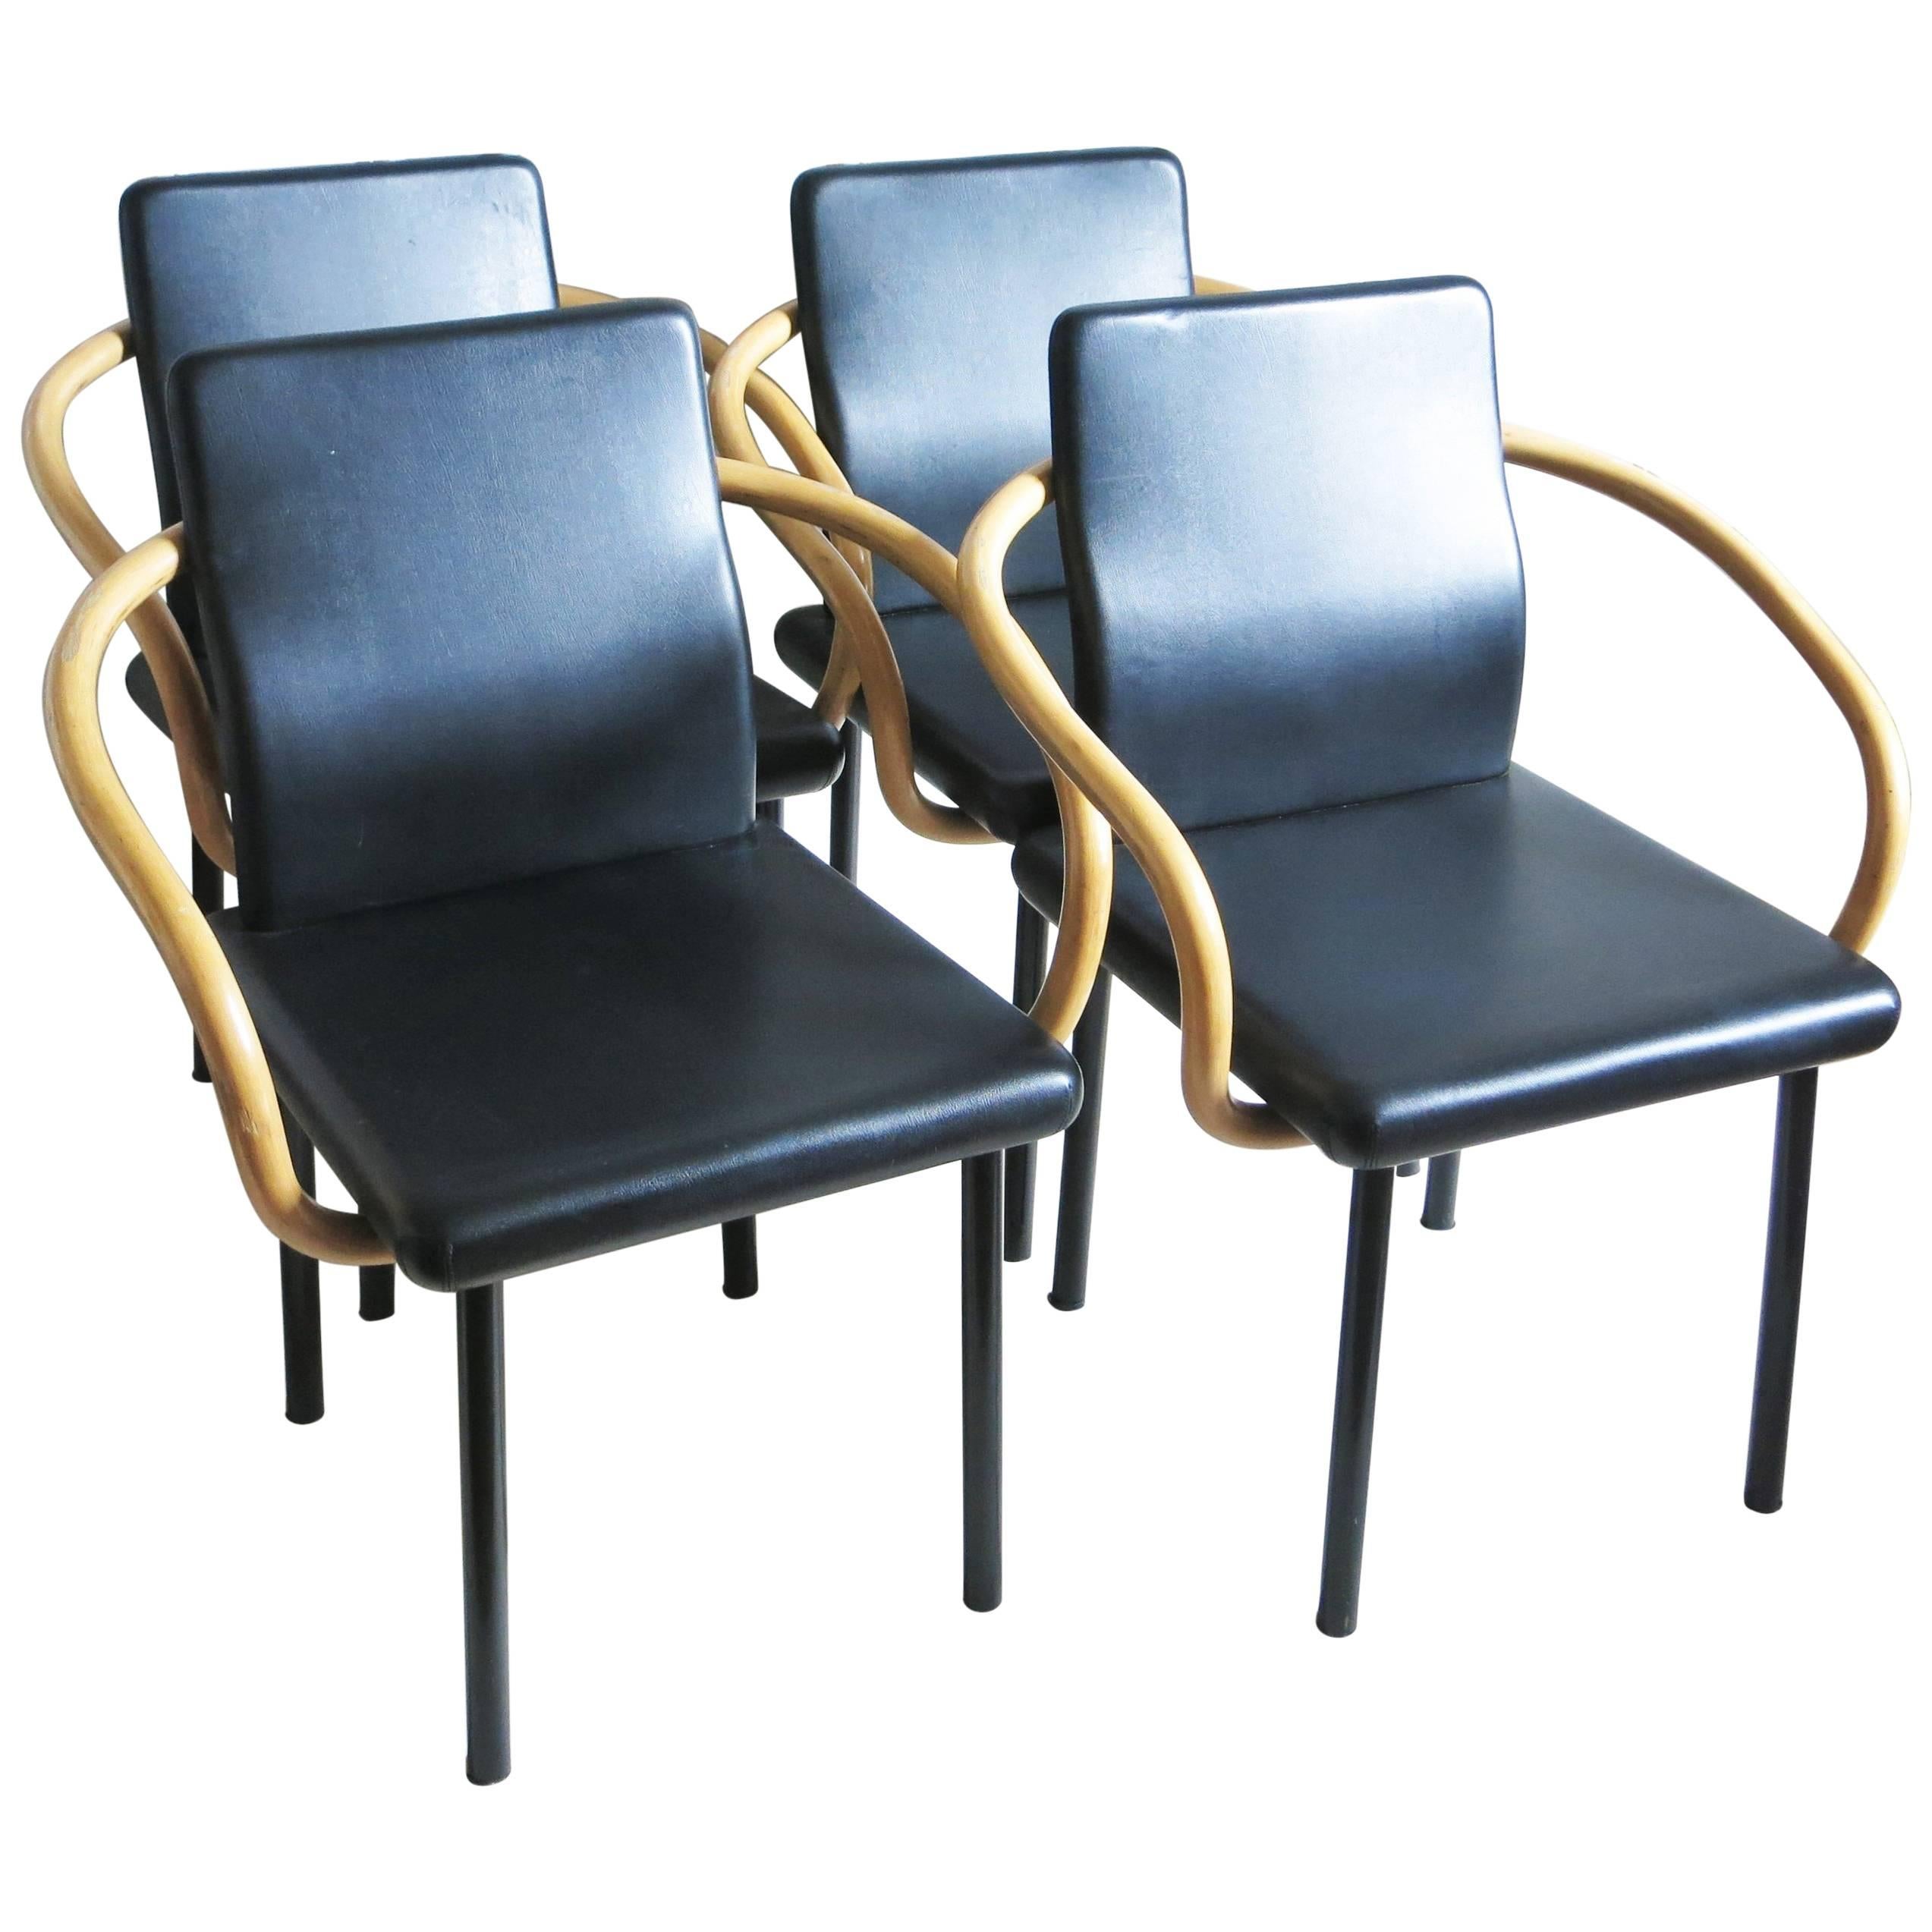 Set of Four Chairs Mandarin by Ettore Sottsass for Knoll